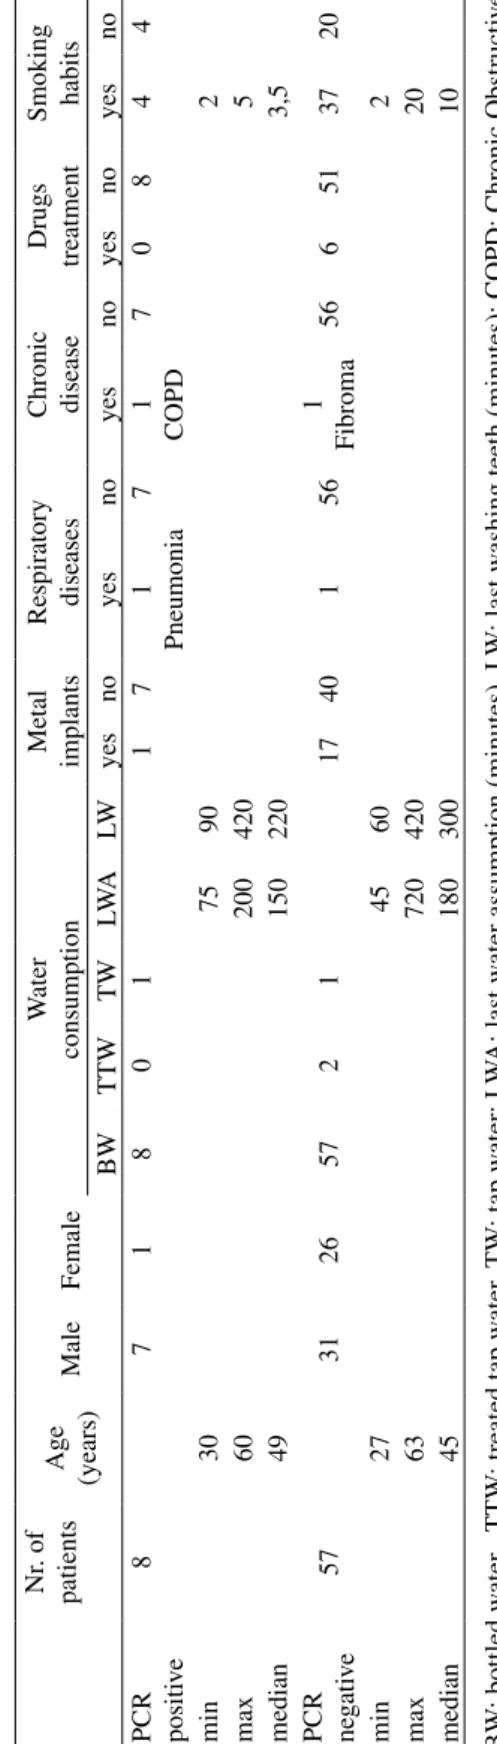 Table 1 - Positive (n=8) and negative (n=57) samples for Legionella